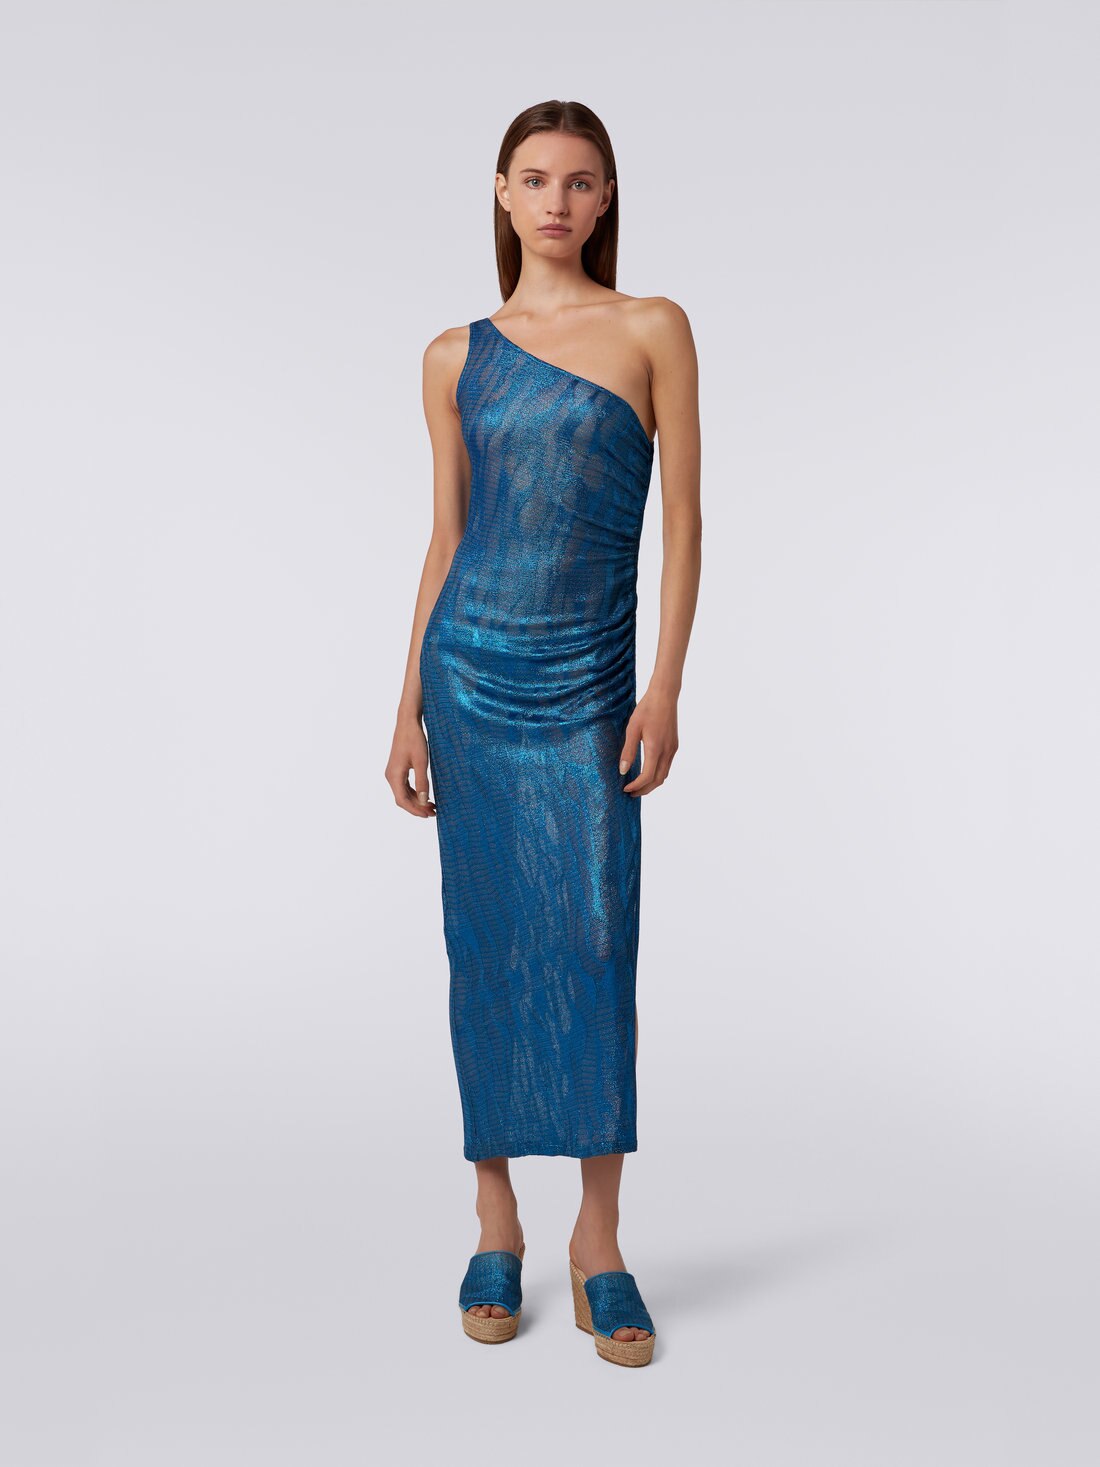 Long one-shoulder cover up in jacquard viscose knit, Blue - MS23WQ02BT006OS72D0 - 1